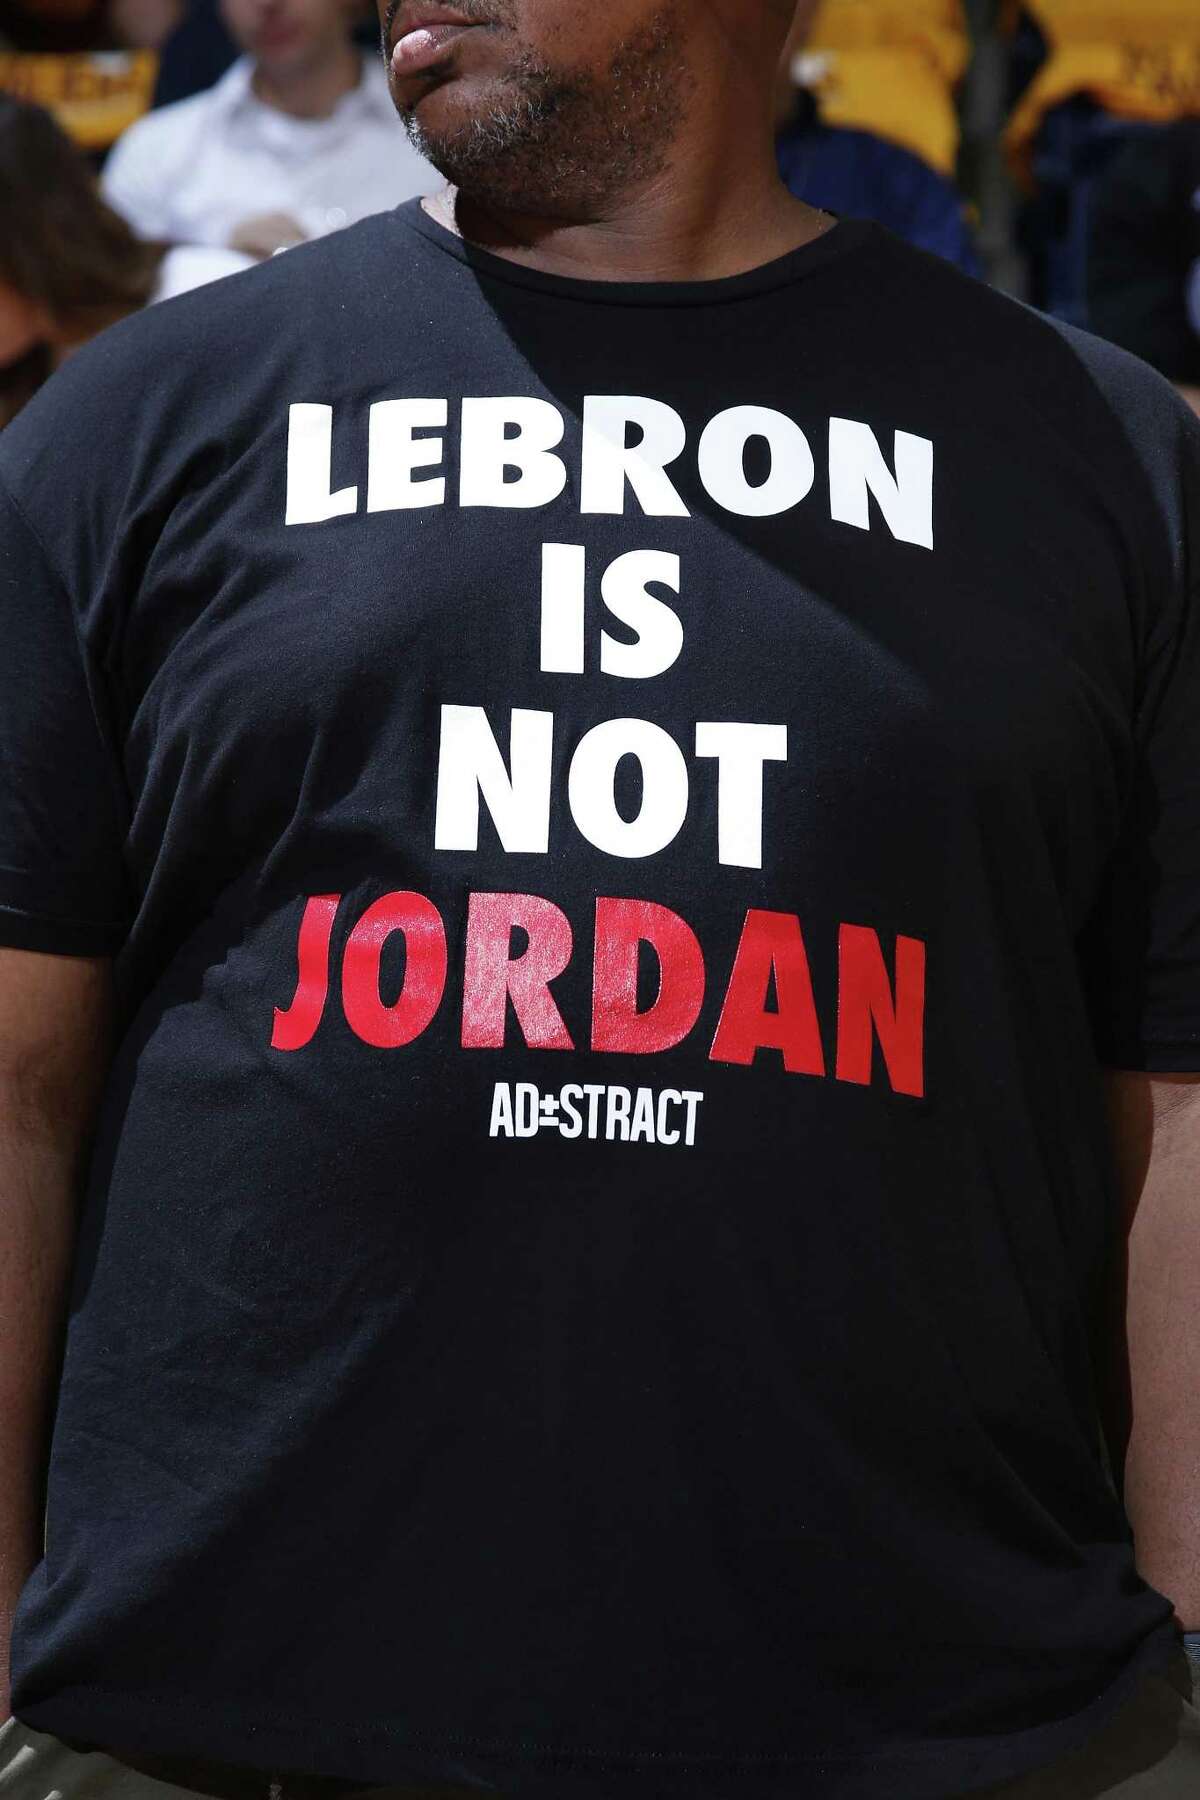 CINCINNATI, OH - OCTOBER 7: A fan displays a shirt comparing LeBron James #23 of the Cleveland Cavaliers to former NBA great Michael Jordan before a preseason game against the Atlanta Hawks at Cintas Center on October 7, 2015 in Cincinnati, Ohio. The Hawks defeated the Cavaliers 98-96. NOTE TO USER: User expressly acknowledges and agrees that, by downloading and or using the photograph, User is consenting to the terms and conditions of the Getty Images License Agreement. (Photo by Joe Robbins/Getty Images)